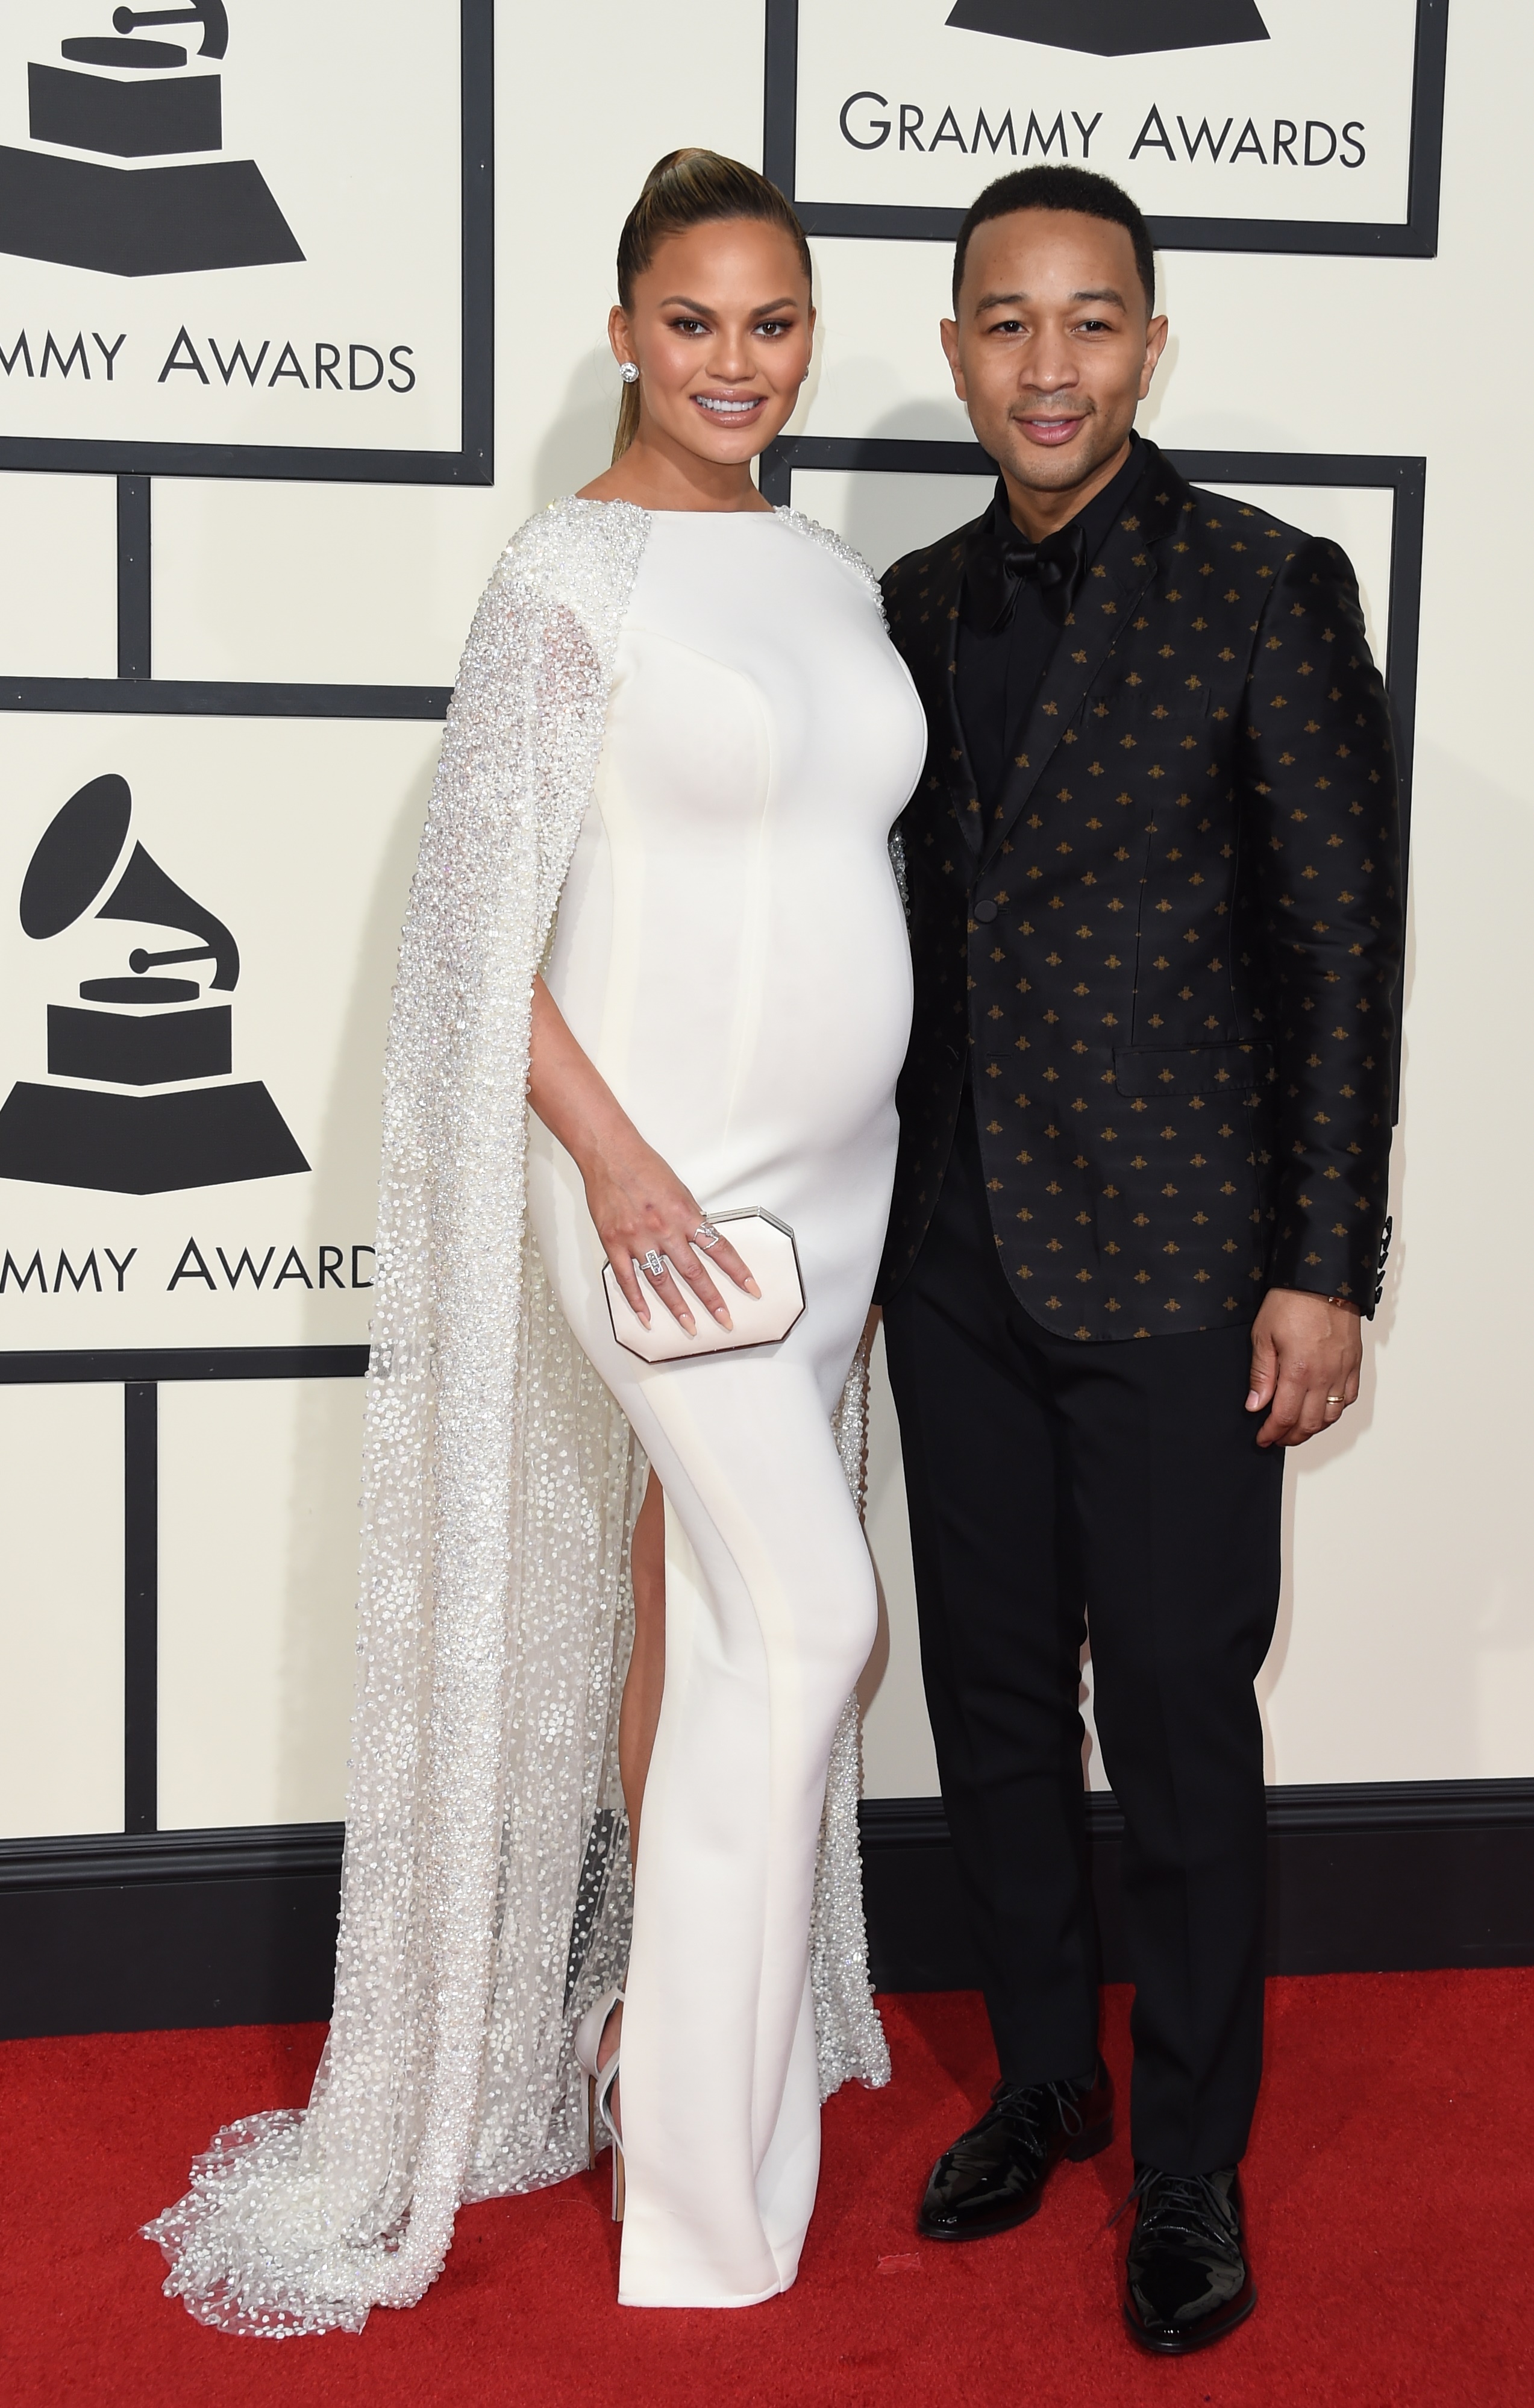 Chrissy Teigen, left, and John Legend, right, attend the 58th GRAMMY Awards at Staples Center on Feb. 15, 2016 in Los Angeles.